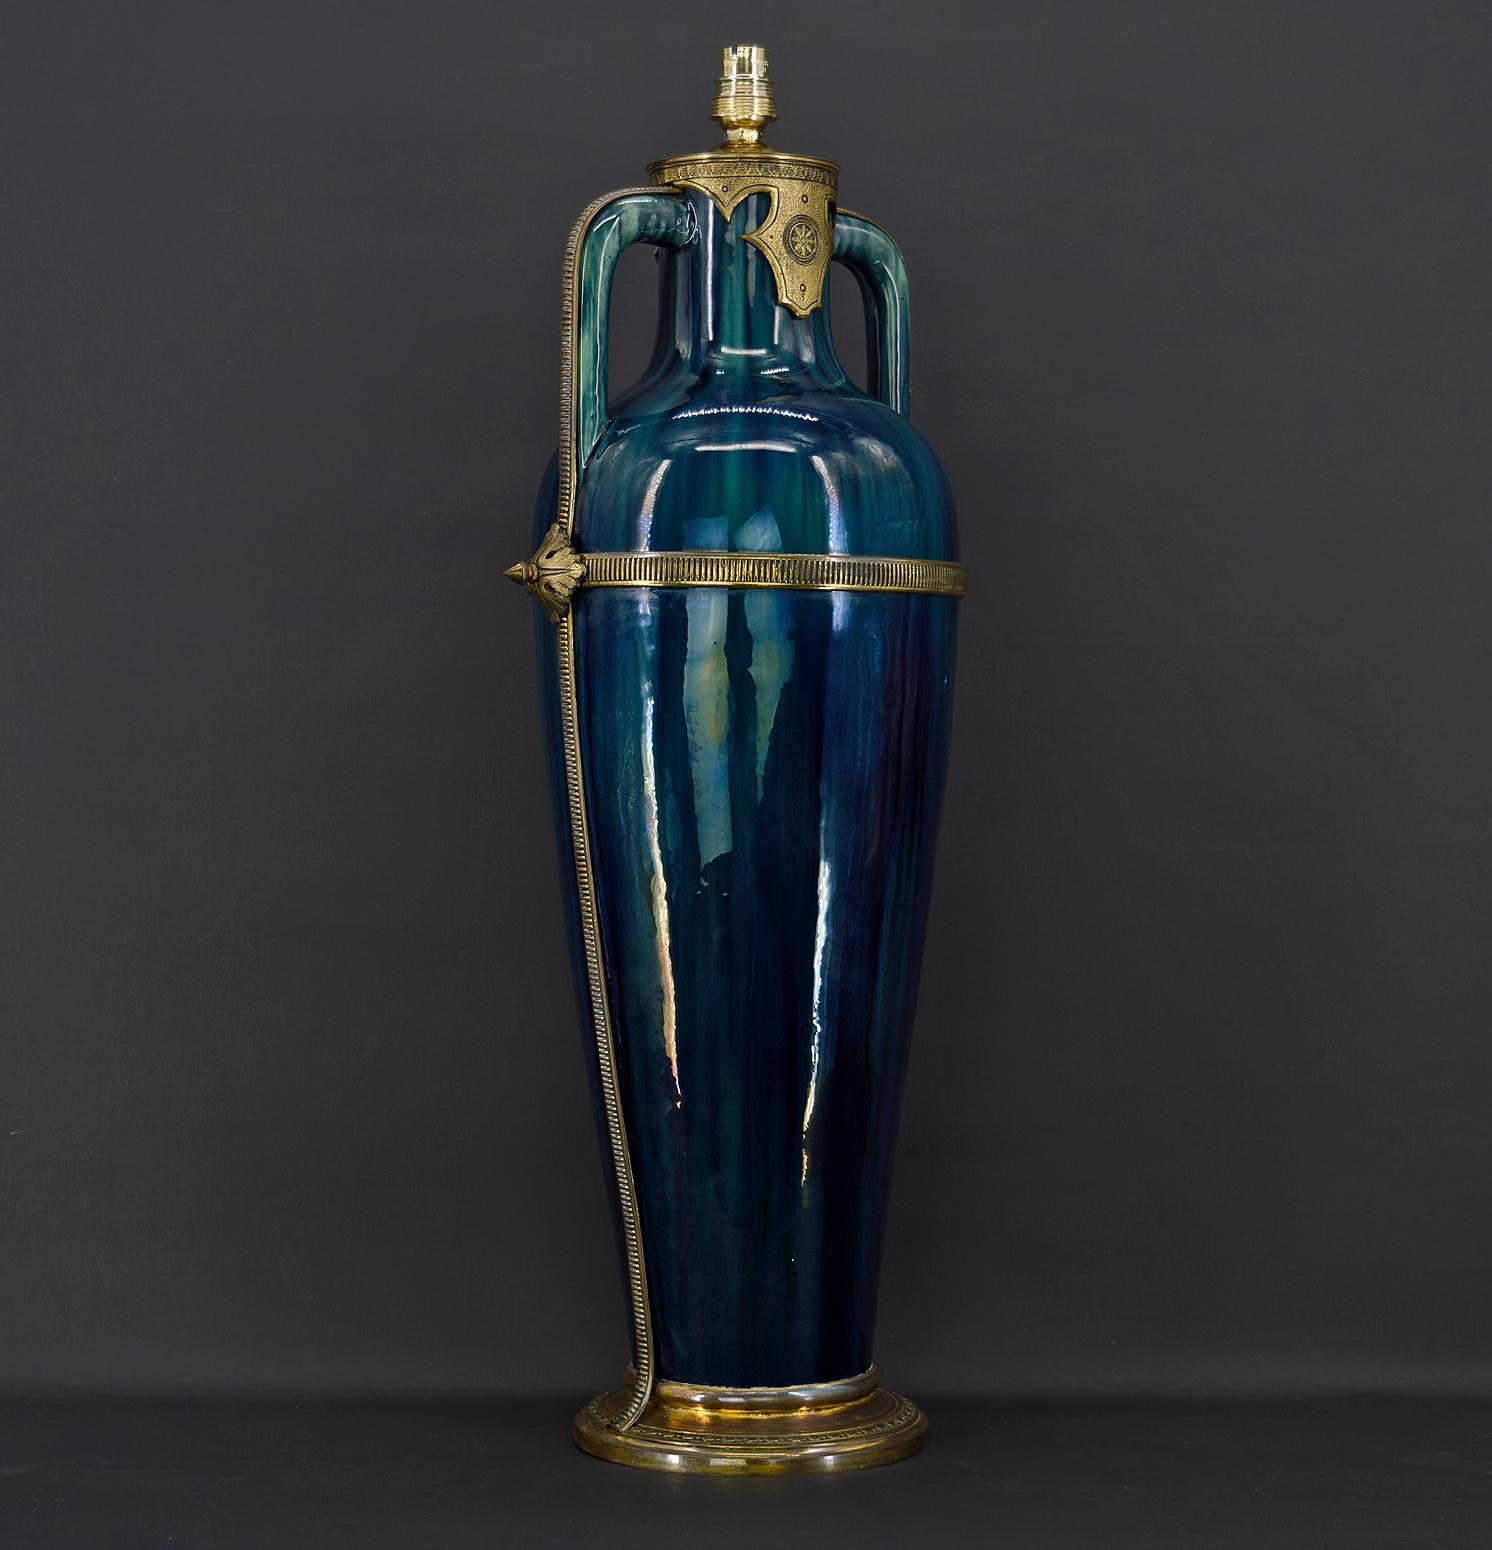 French Art Nouveau Blue Ceramic Vase-Lamp attributed to Paul Milet, France, circa 1900 For Sale